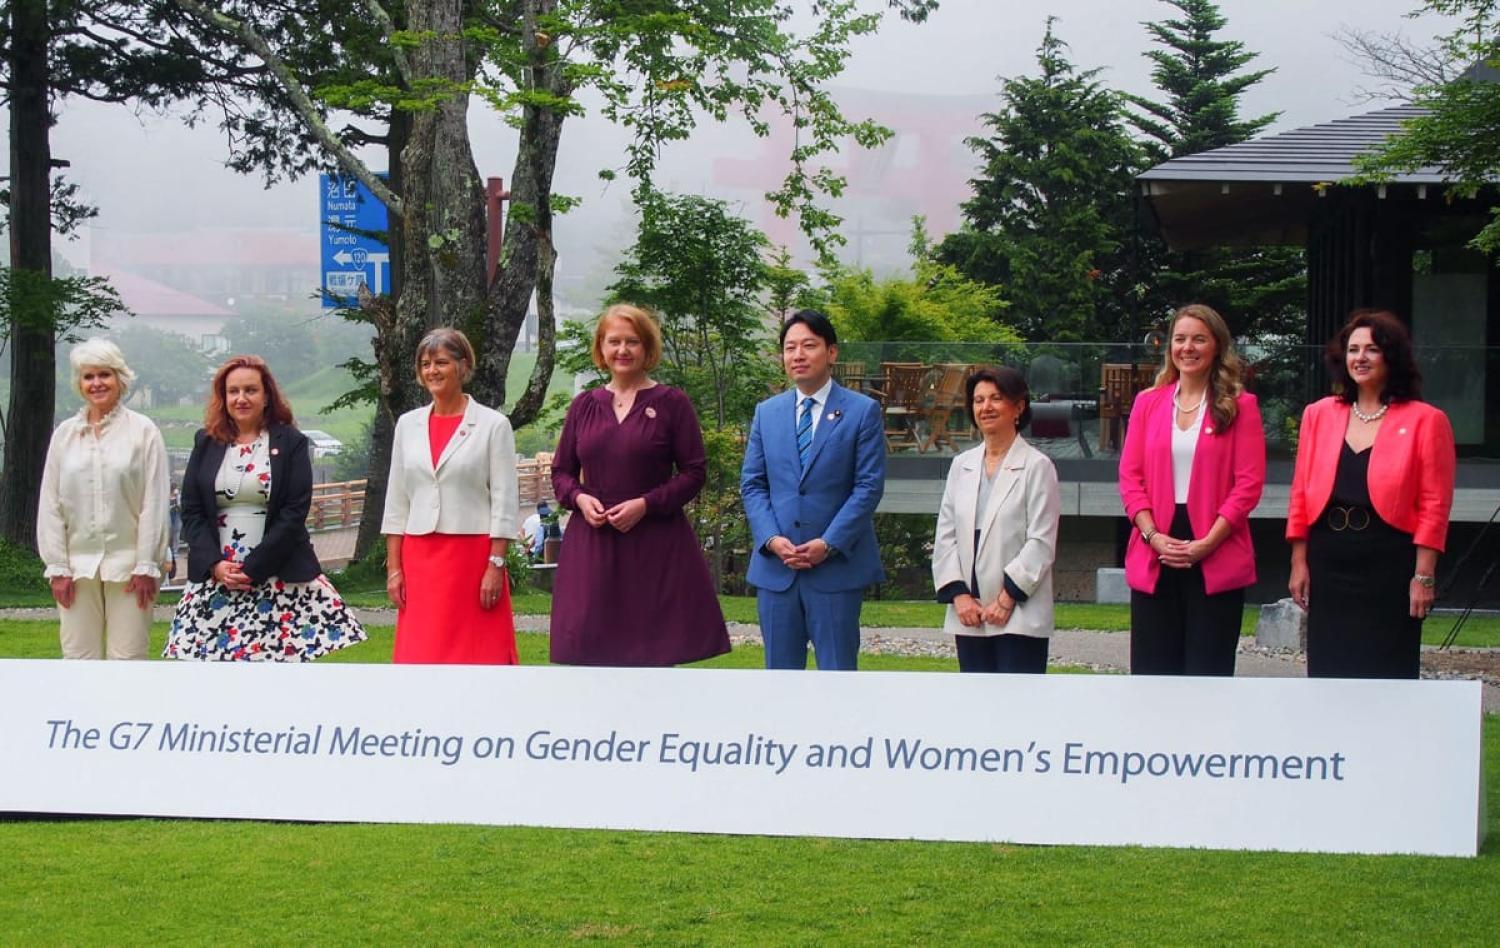 TIME magazine called it “an awkward photo-op”: Participants at the G7 Ministerial Meeting on Gender Equality and Women’s Empowerment (JIJI PRESS/AFP via Getty Images)